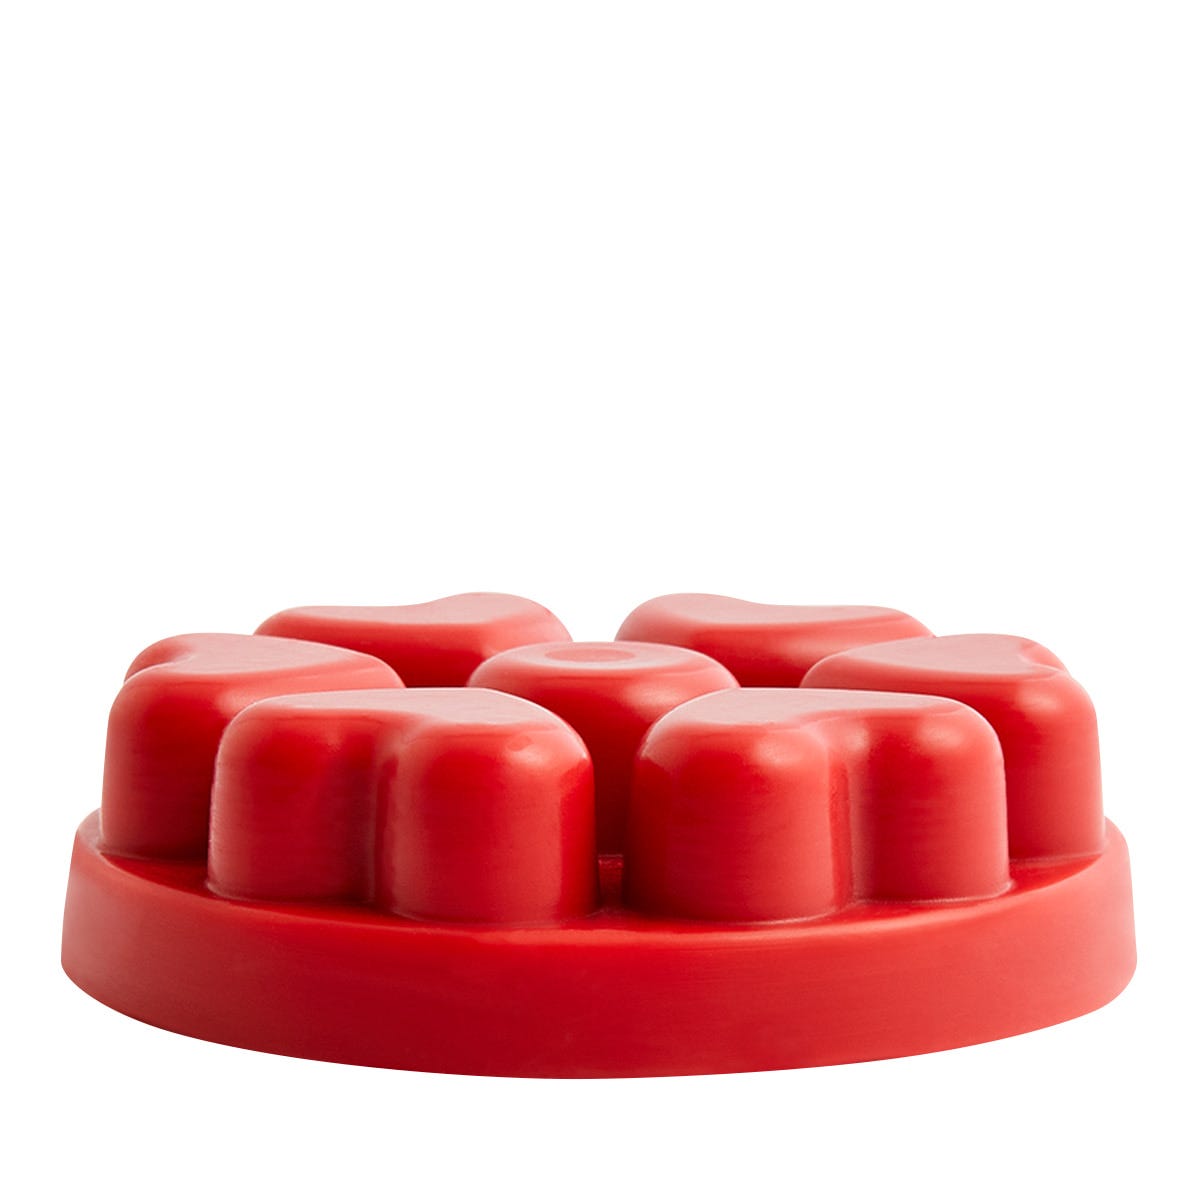 Wild Woodland Berry Scent Plus® Heart Wax Melts - PartyLite US